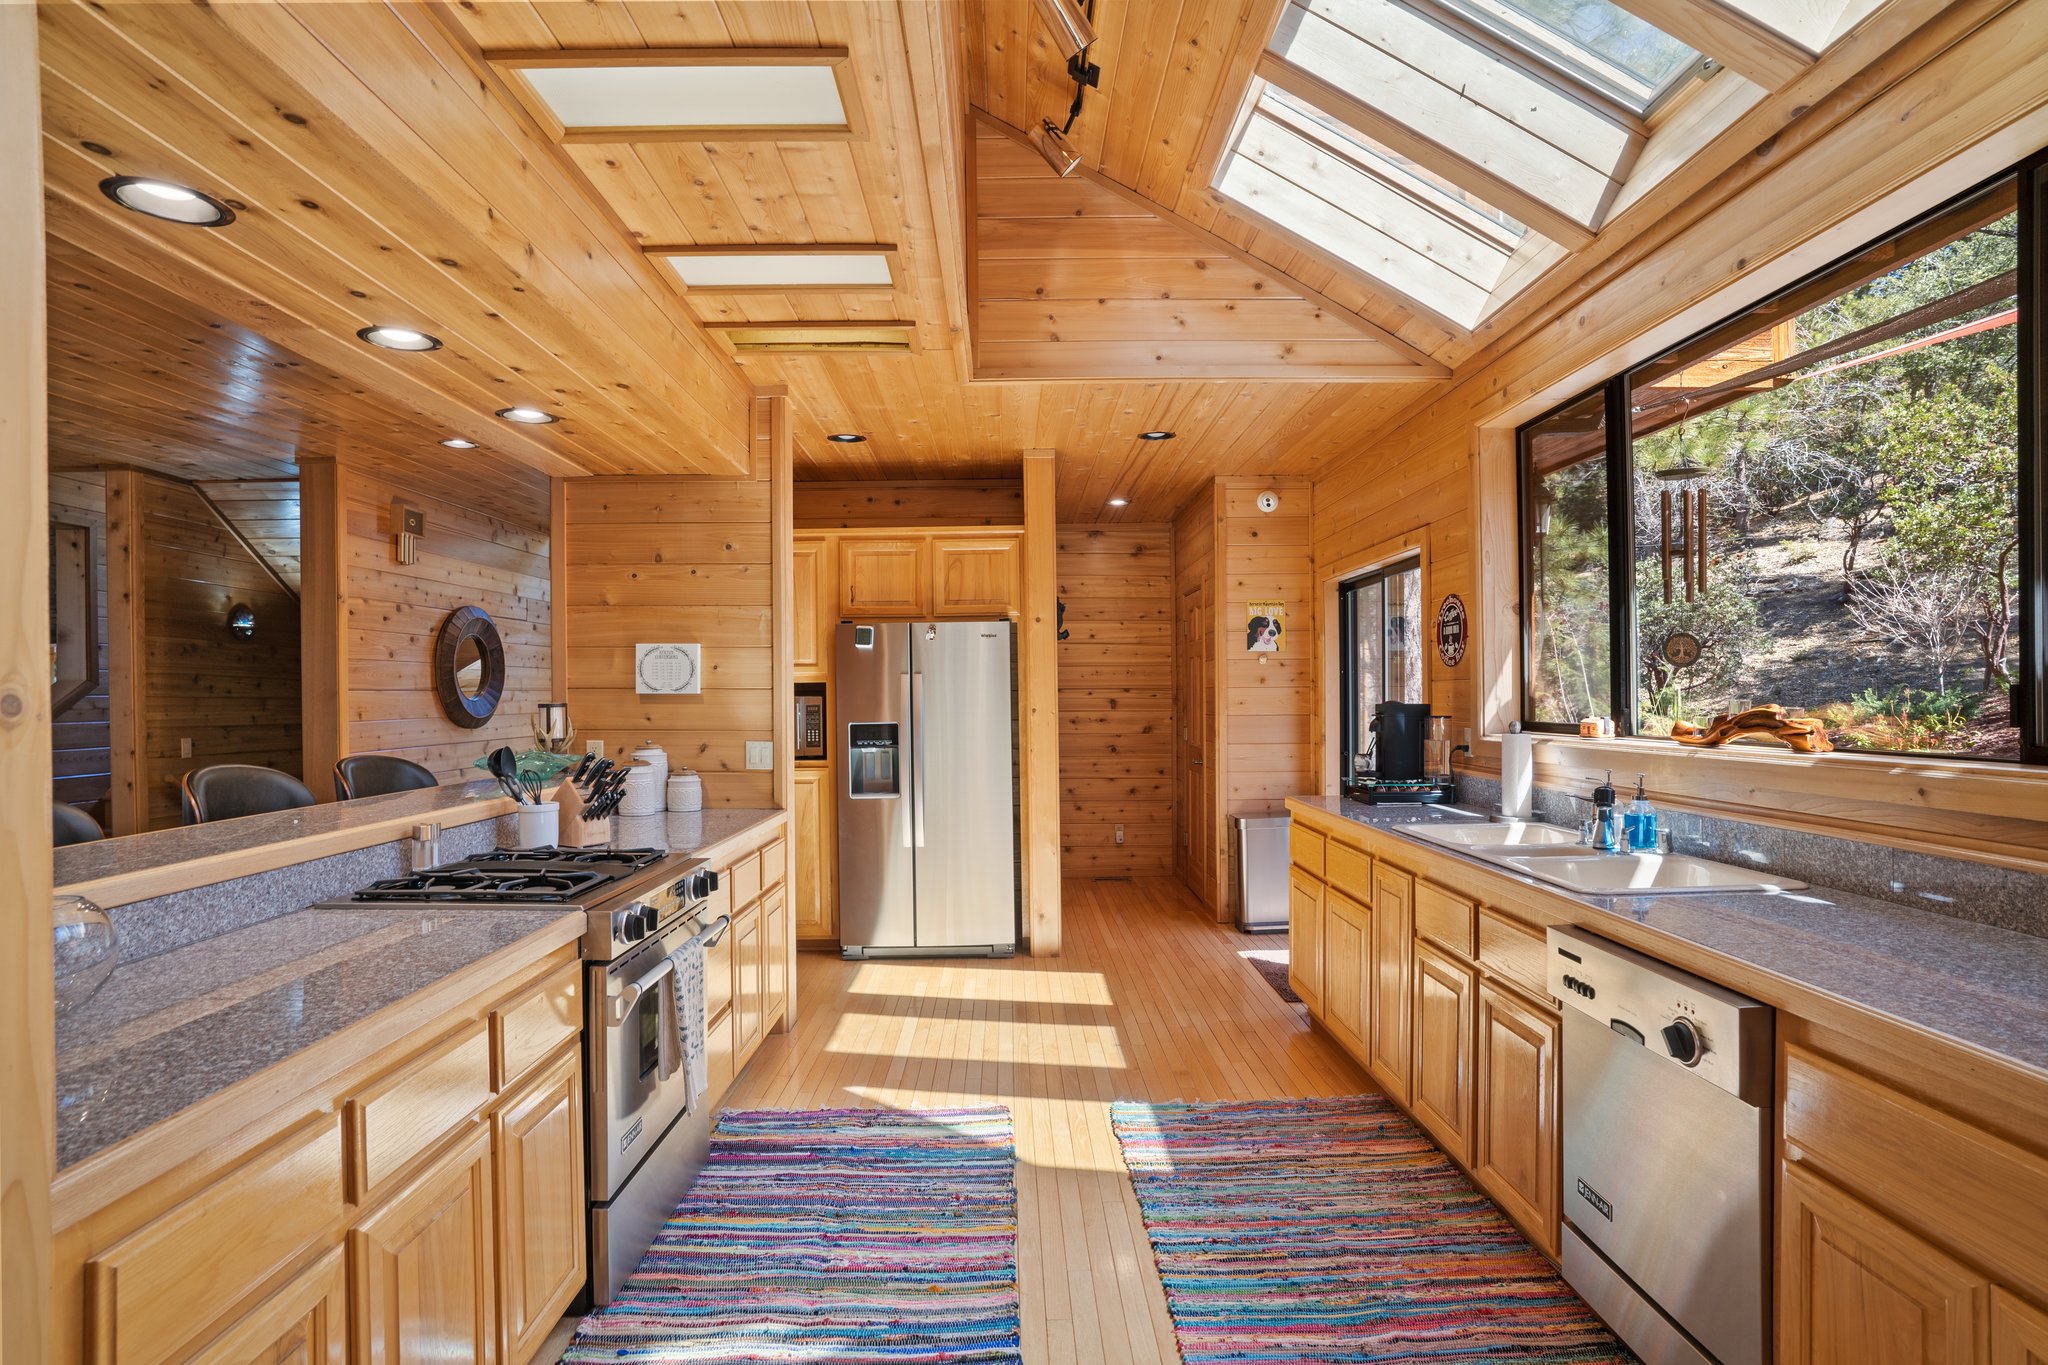 Kitchen with picture window and skylights.